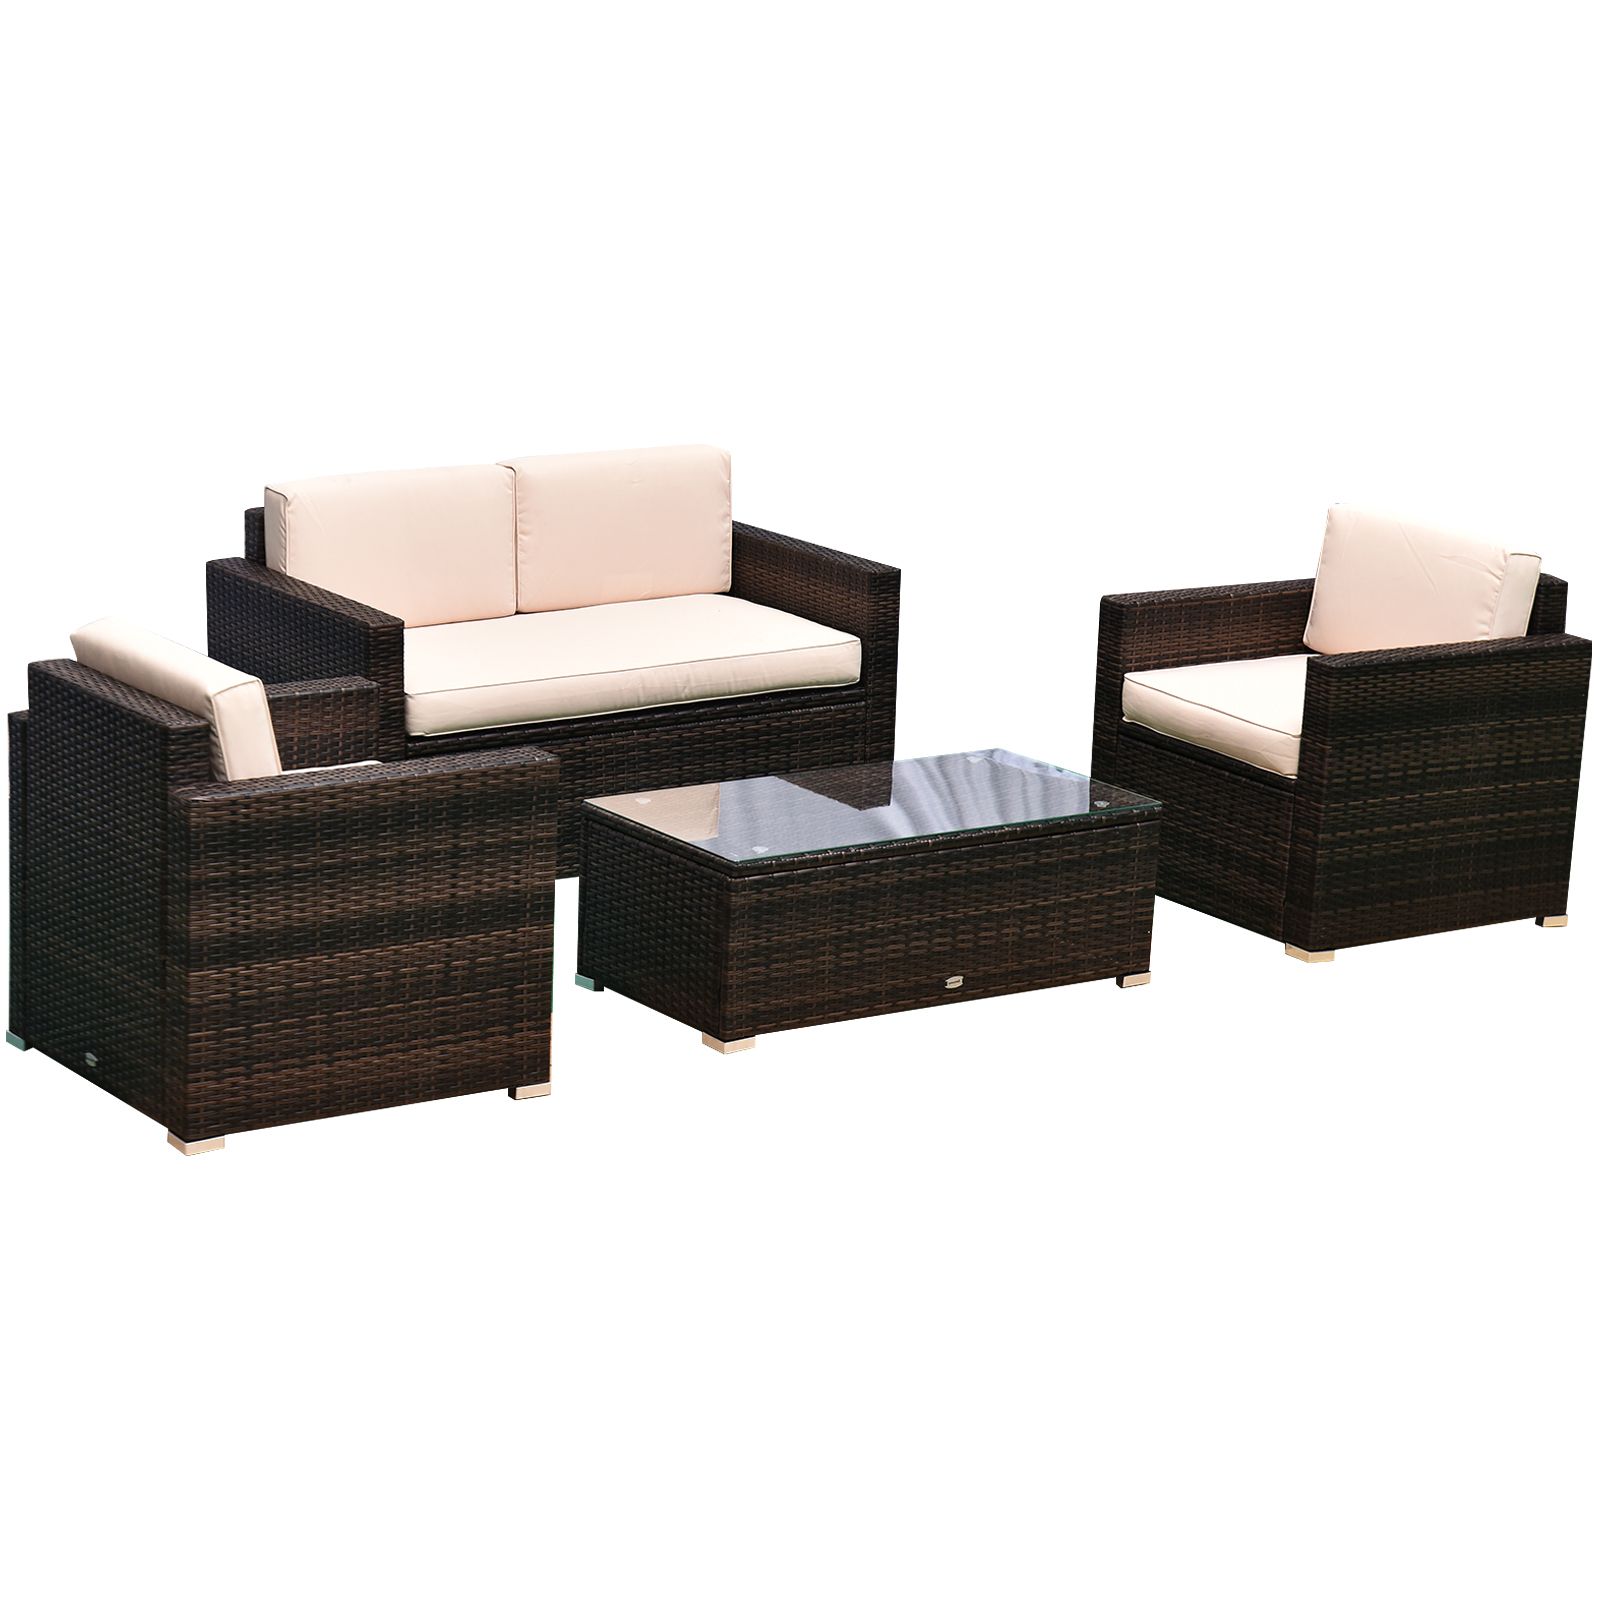 Outsunny 4 Piece Rattan Wicker Furniture Set, Outdoor Cushioned Conversation  Furniture With 2 Chairs, Loveseat, And Glass Coffee Table, Beige (View 15 of 15)